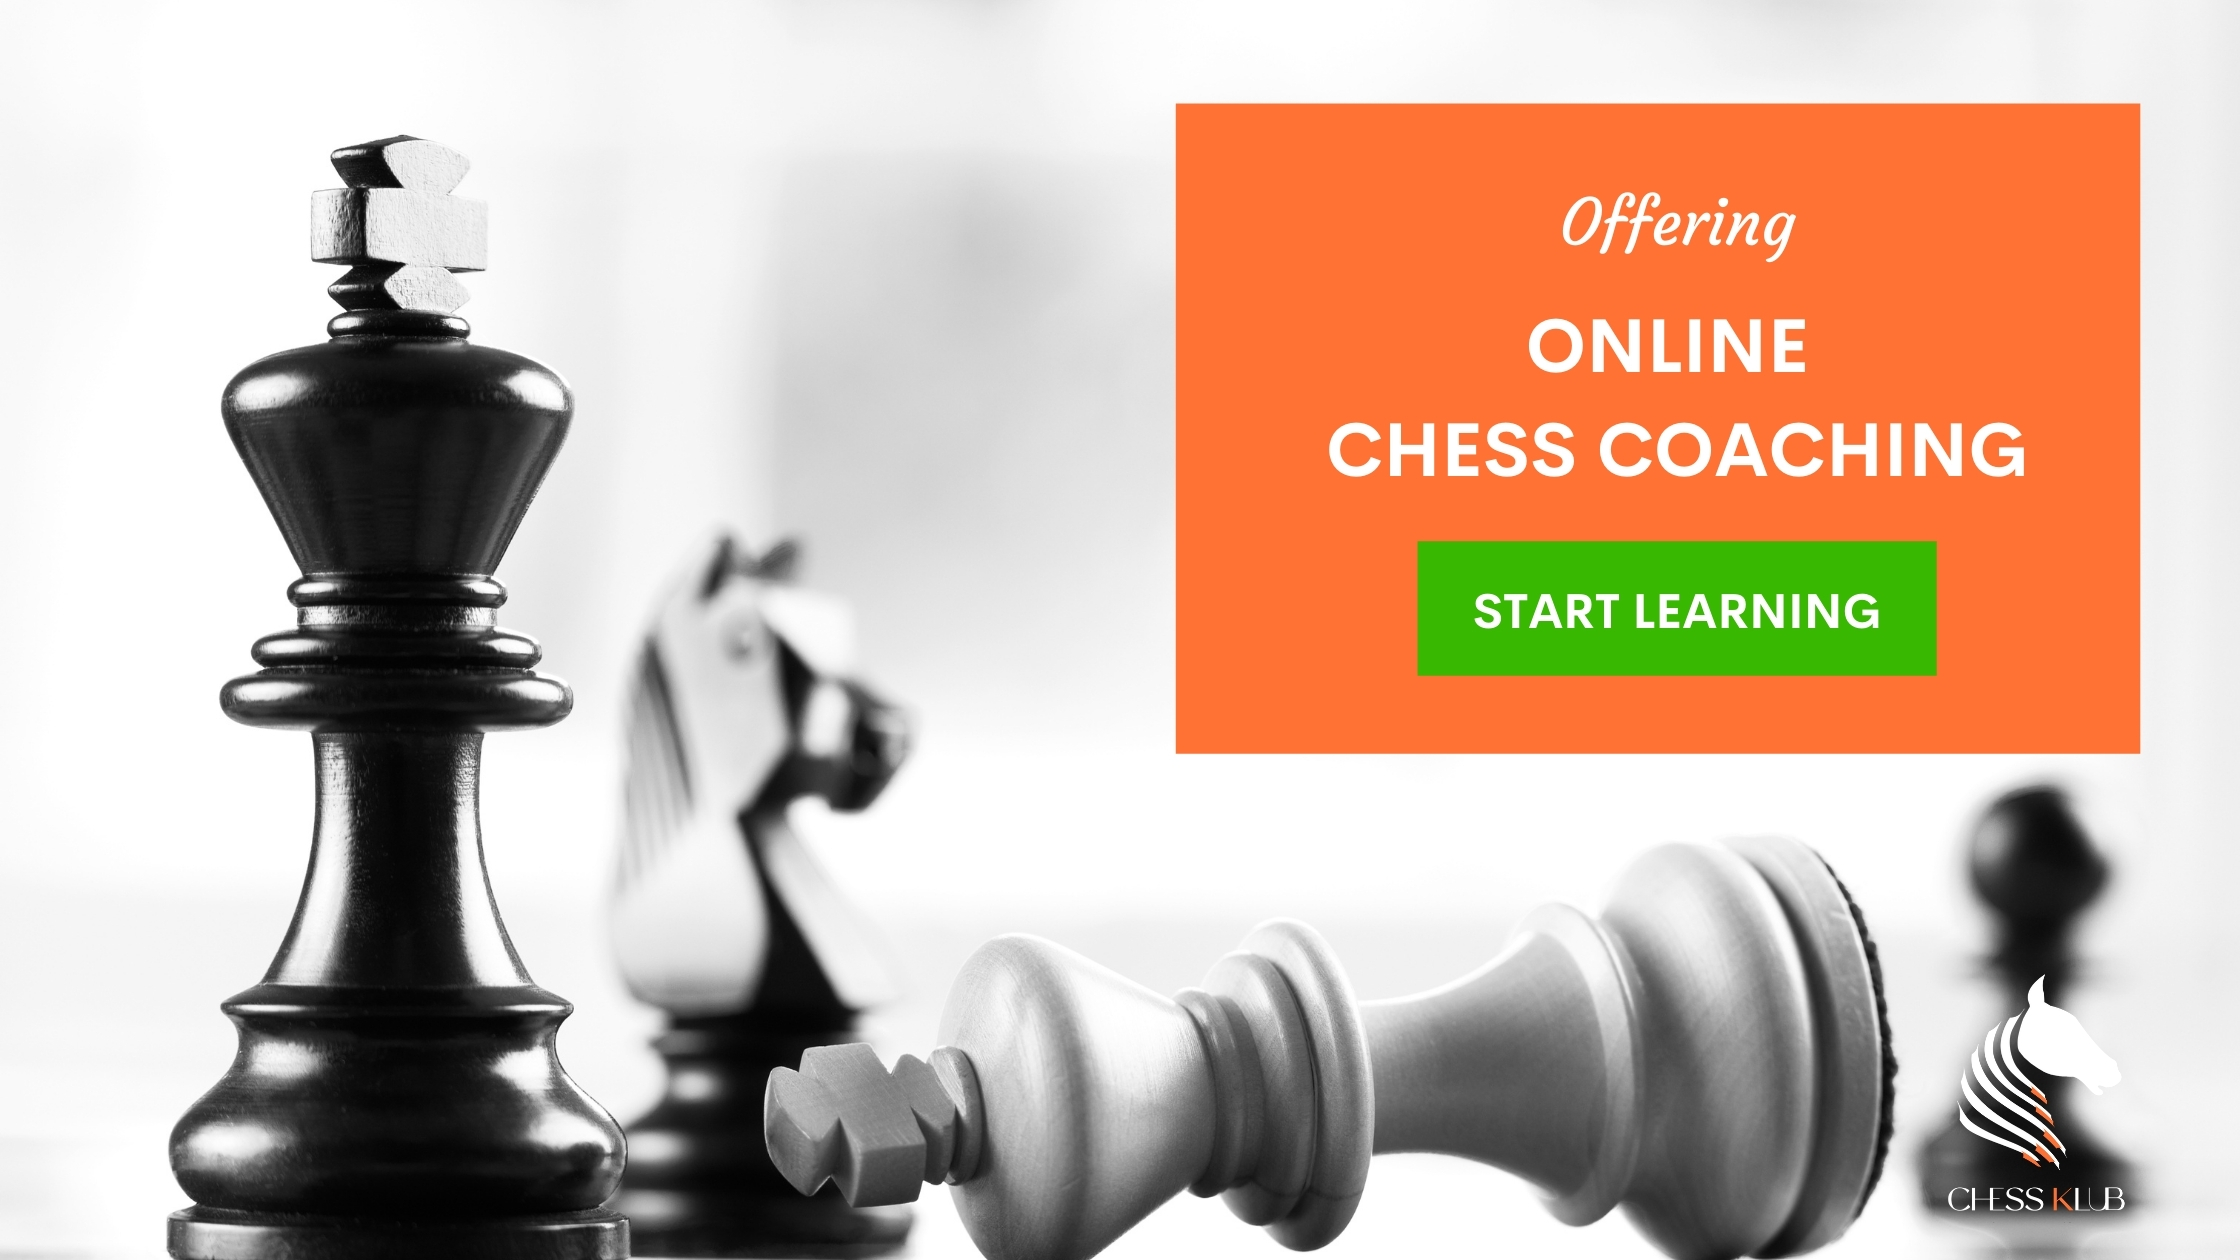 Offering Online Chess Coaching